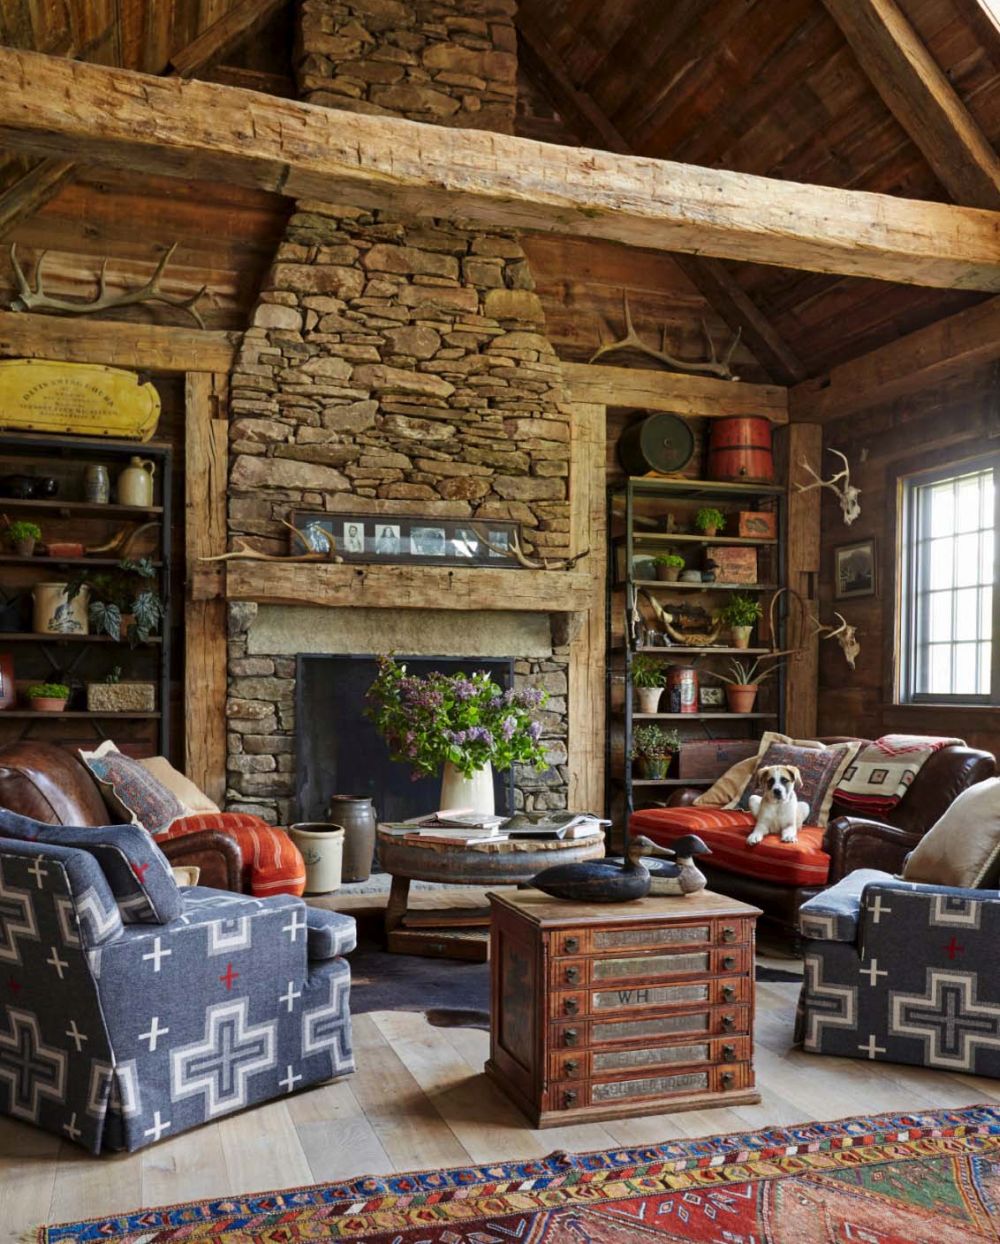 The living room features a cozy seating area arranged in front of a large stone-clad fireplace